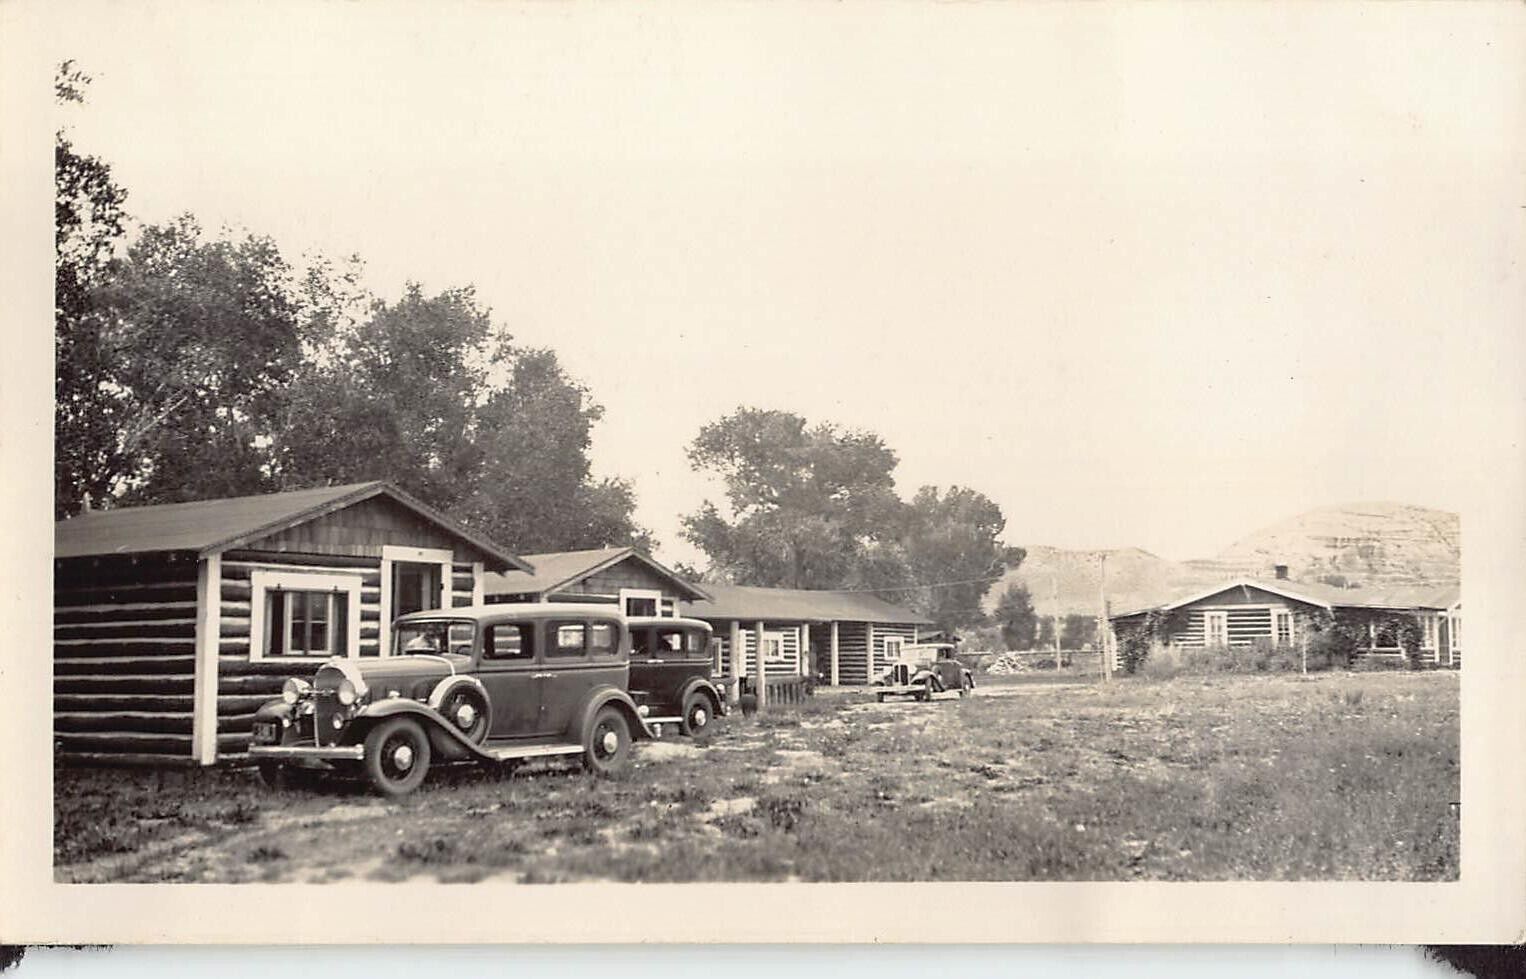 Antique Cars Parked in Front of Cabins 1930s Photo Camp Grounds Wyoming